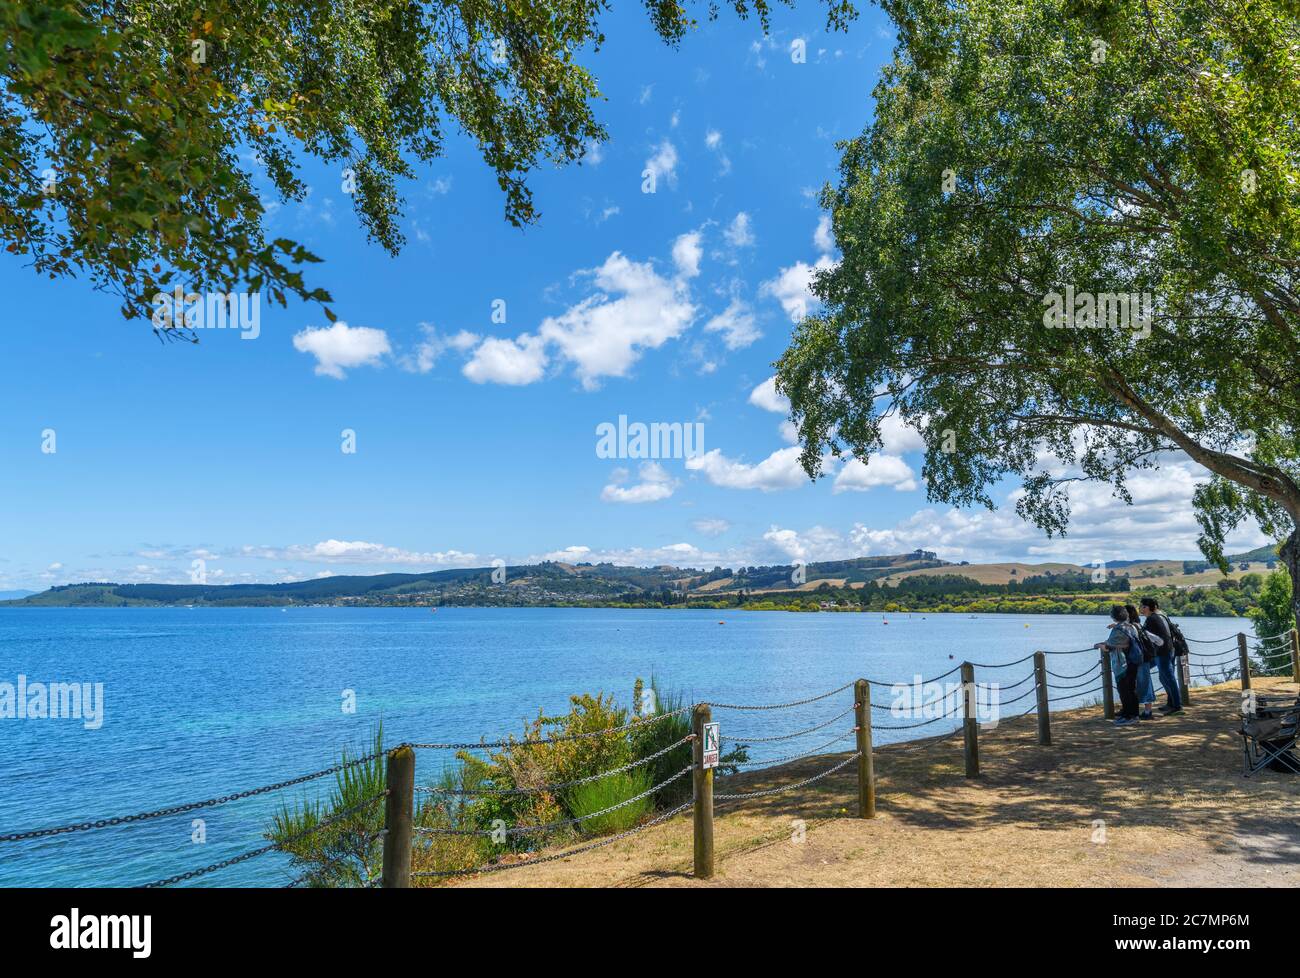 Tourists on the lakefront in Taupo, Lake Taupo, New Zealand Stock Photo